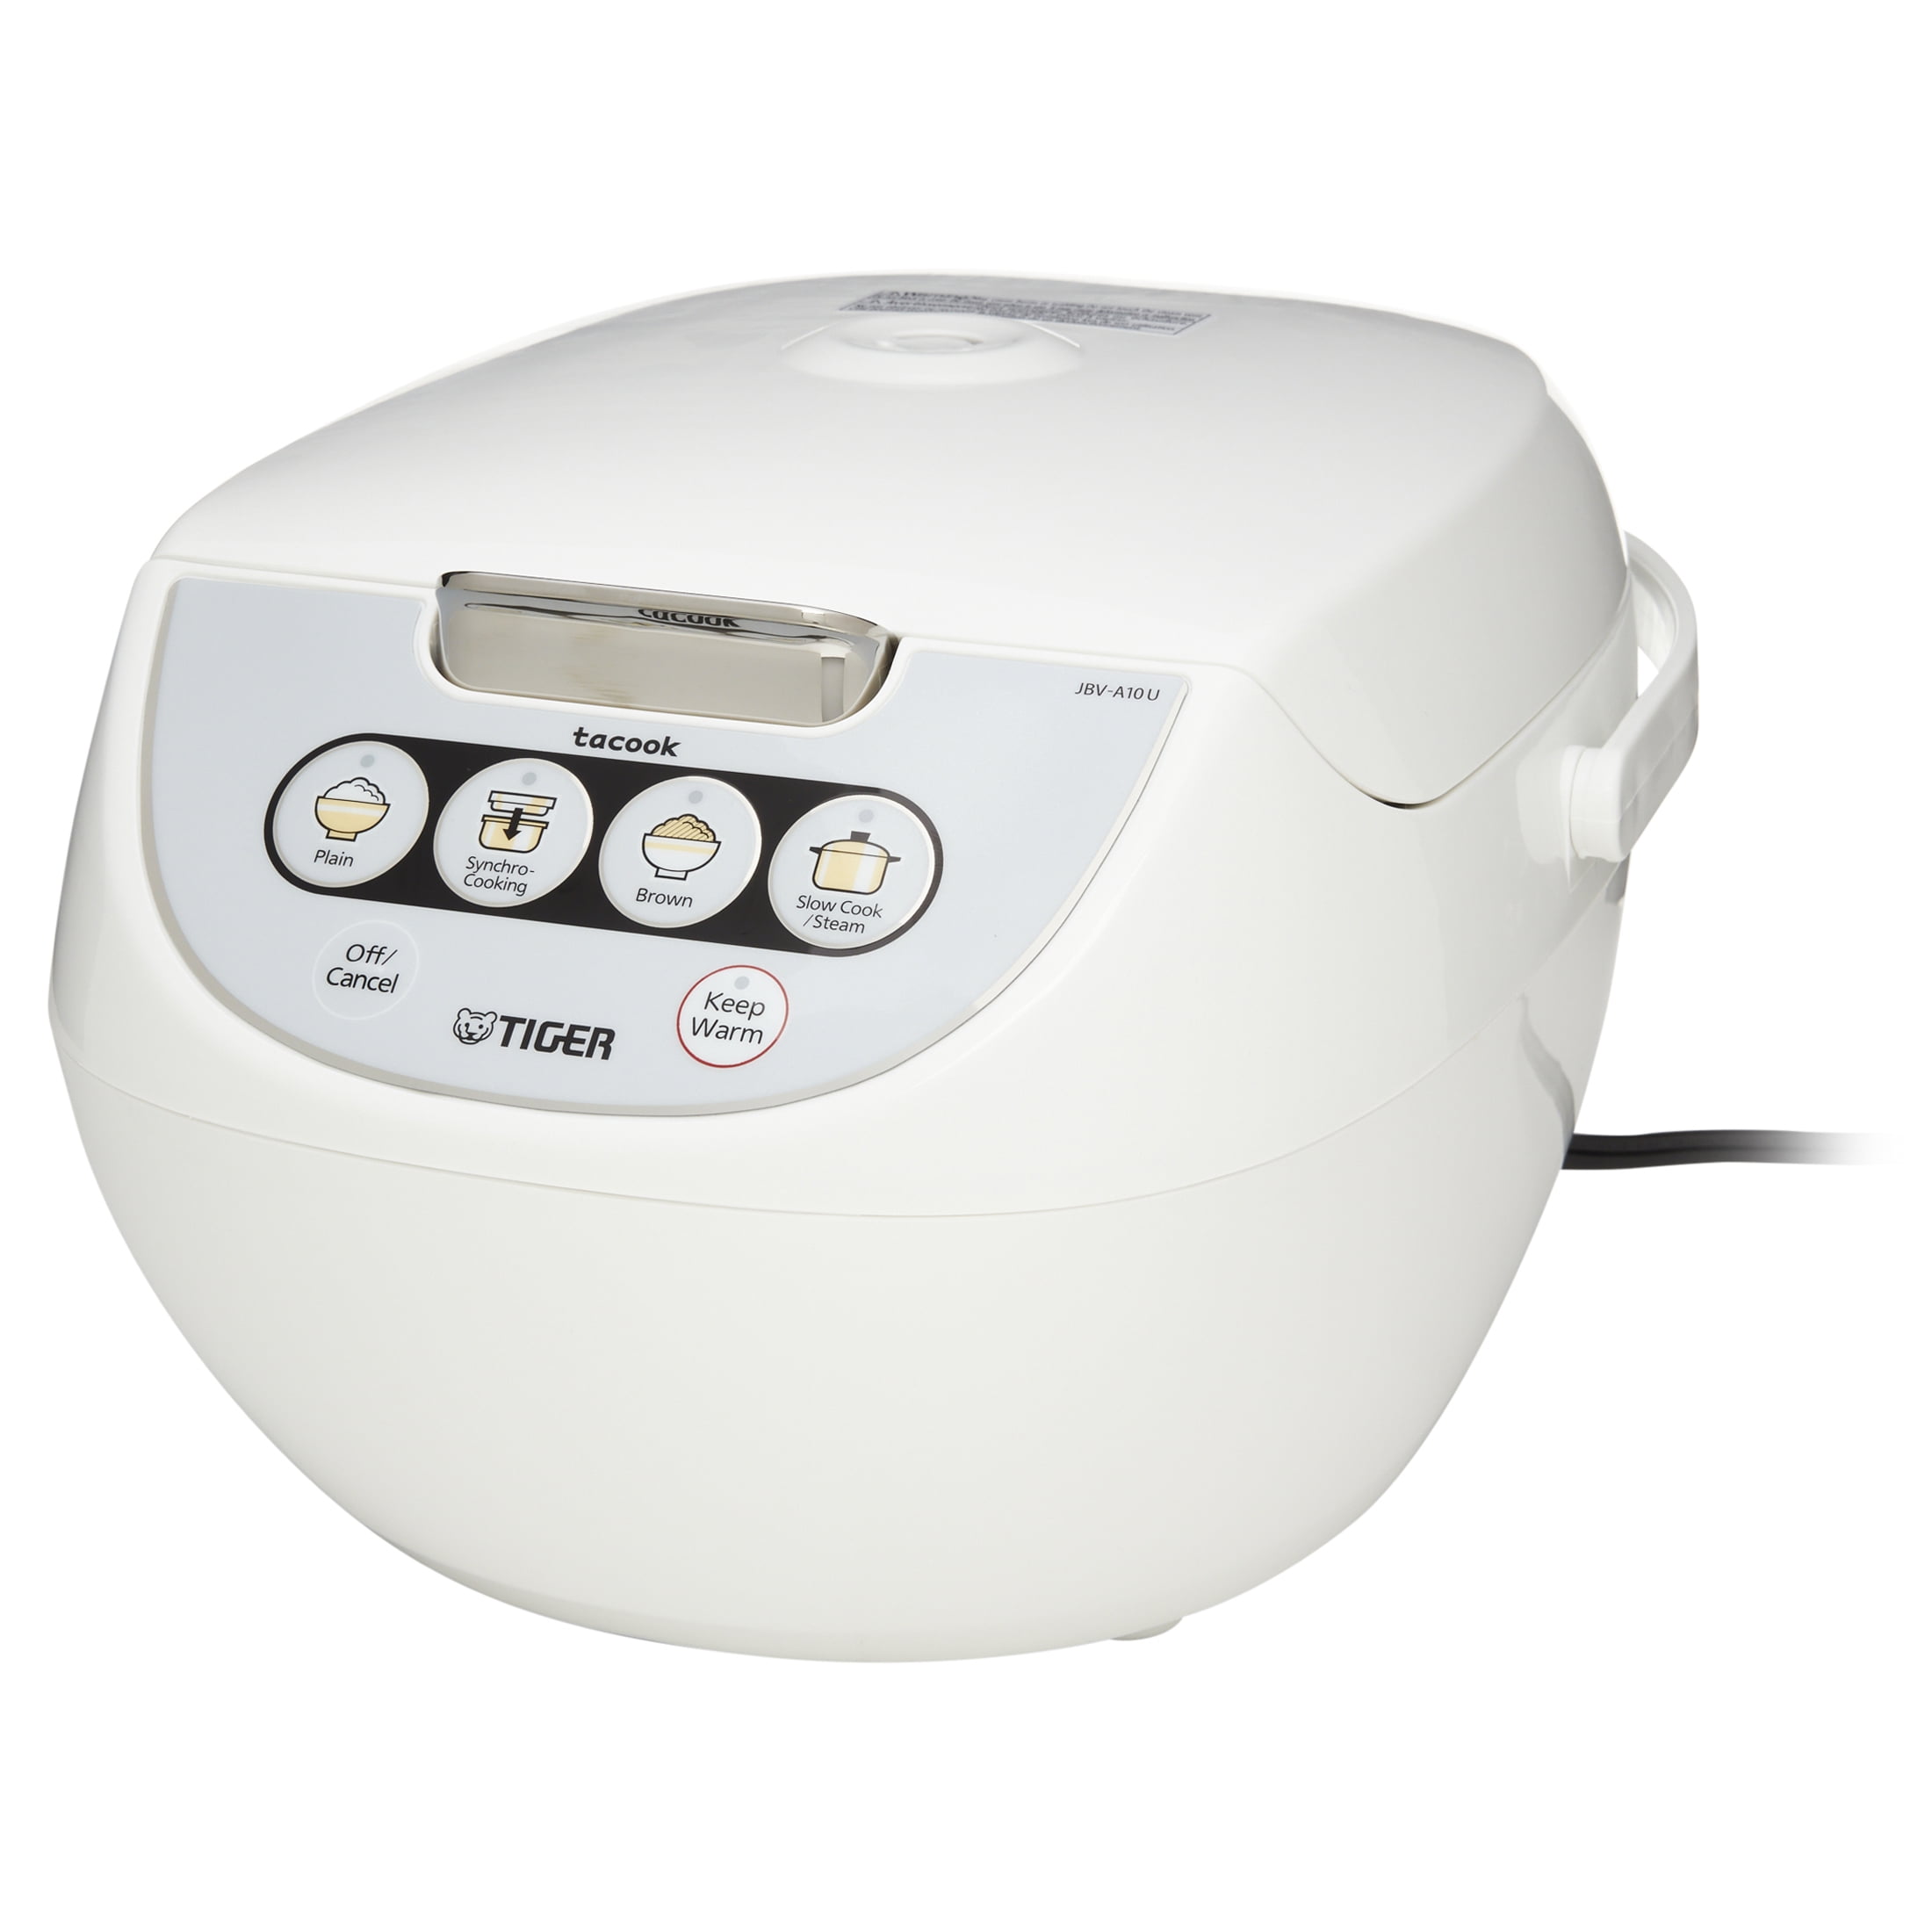 TIGER JBV-A10U 5.5-Cup (Uncooked) Micom Rice Cooker with Food